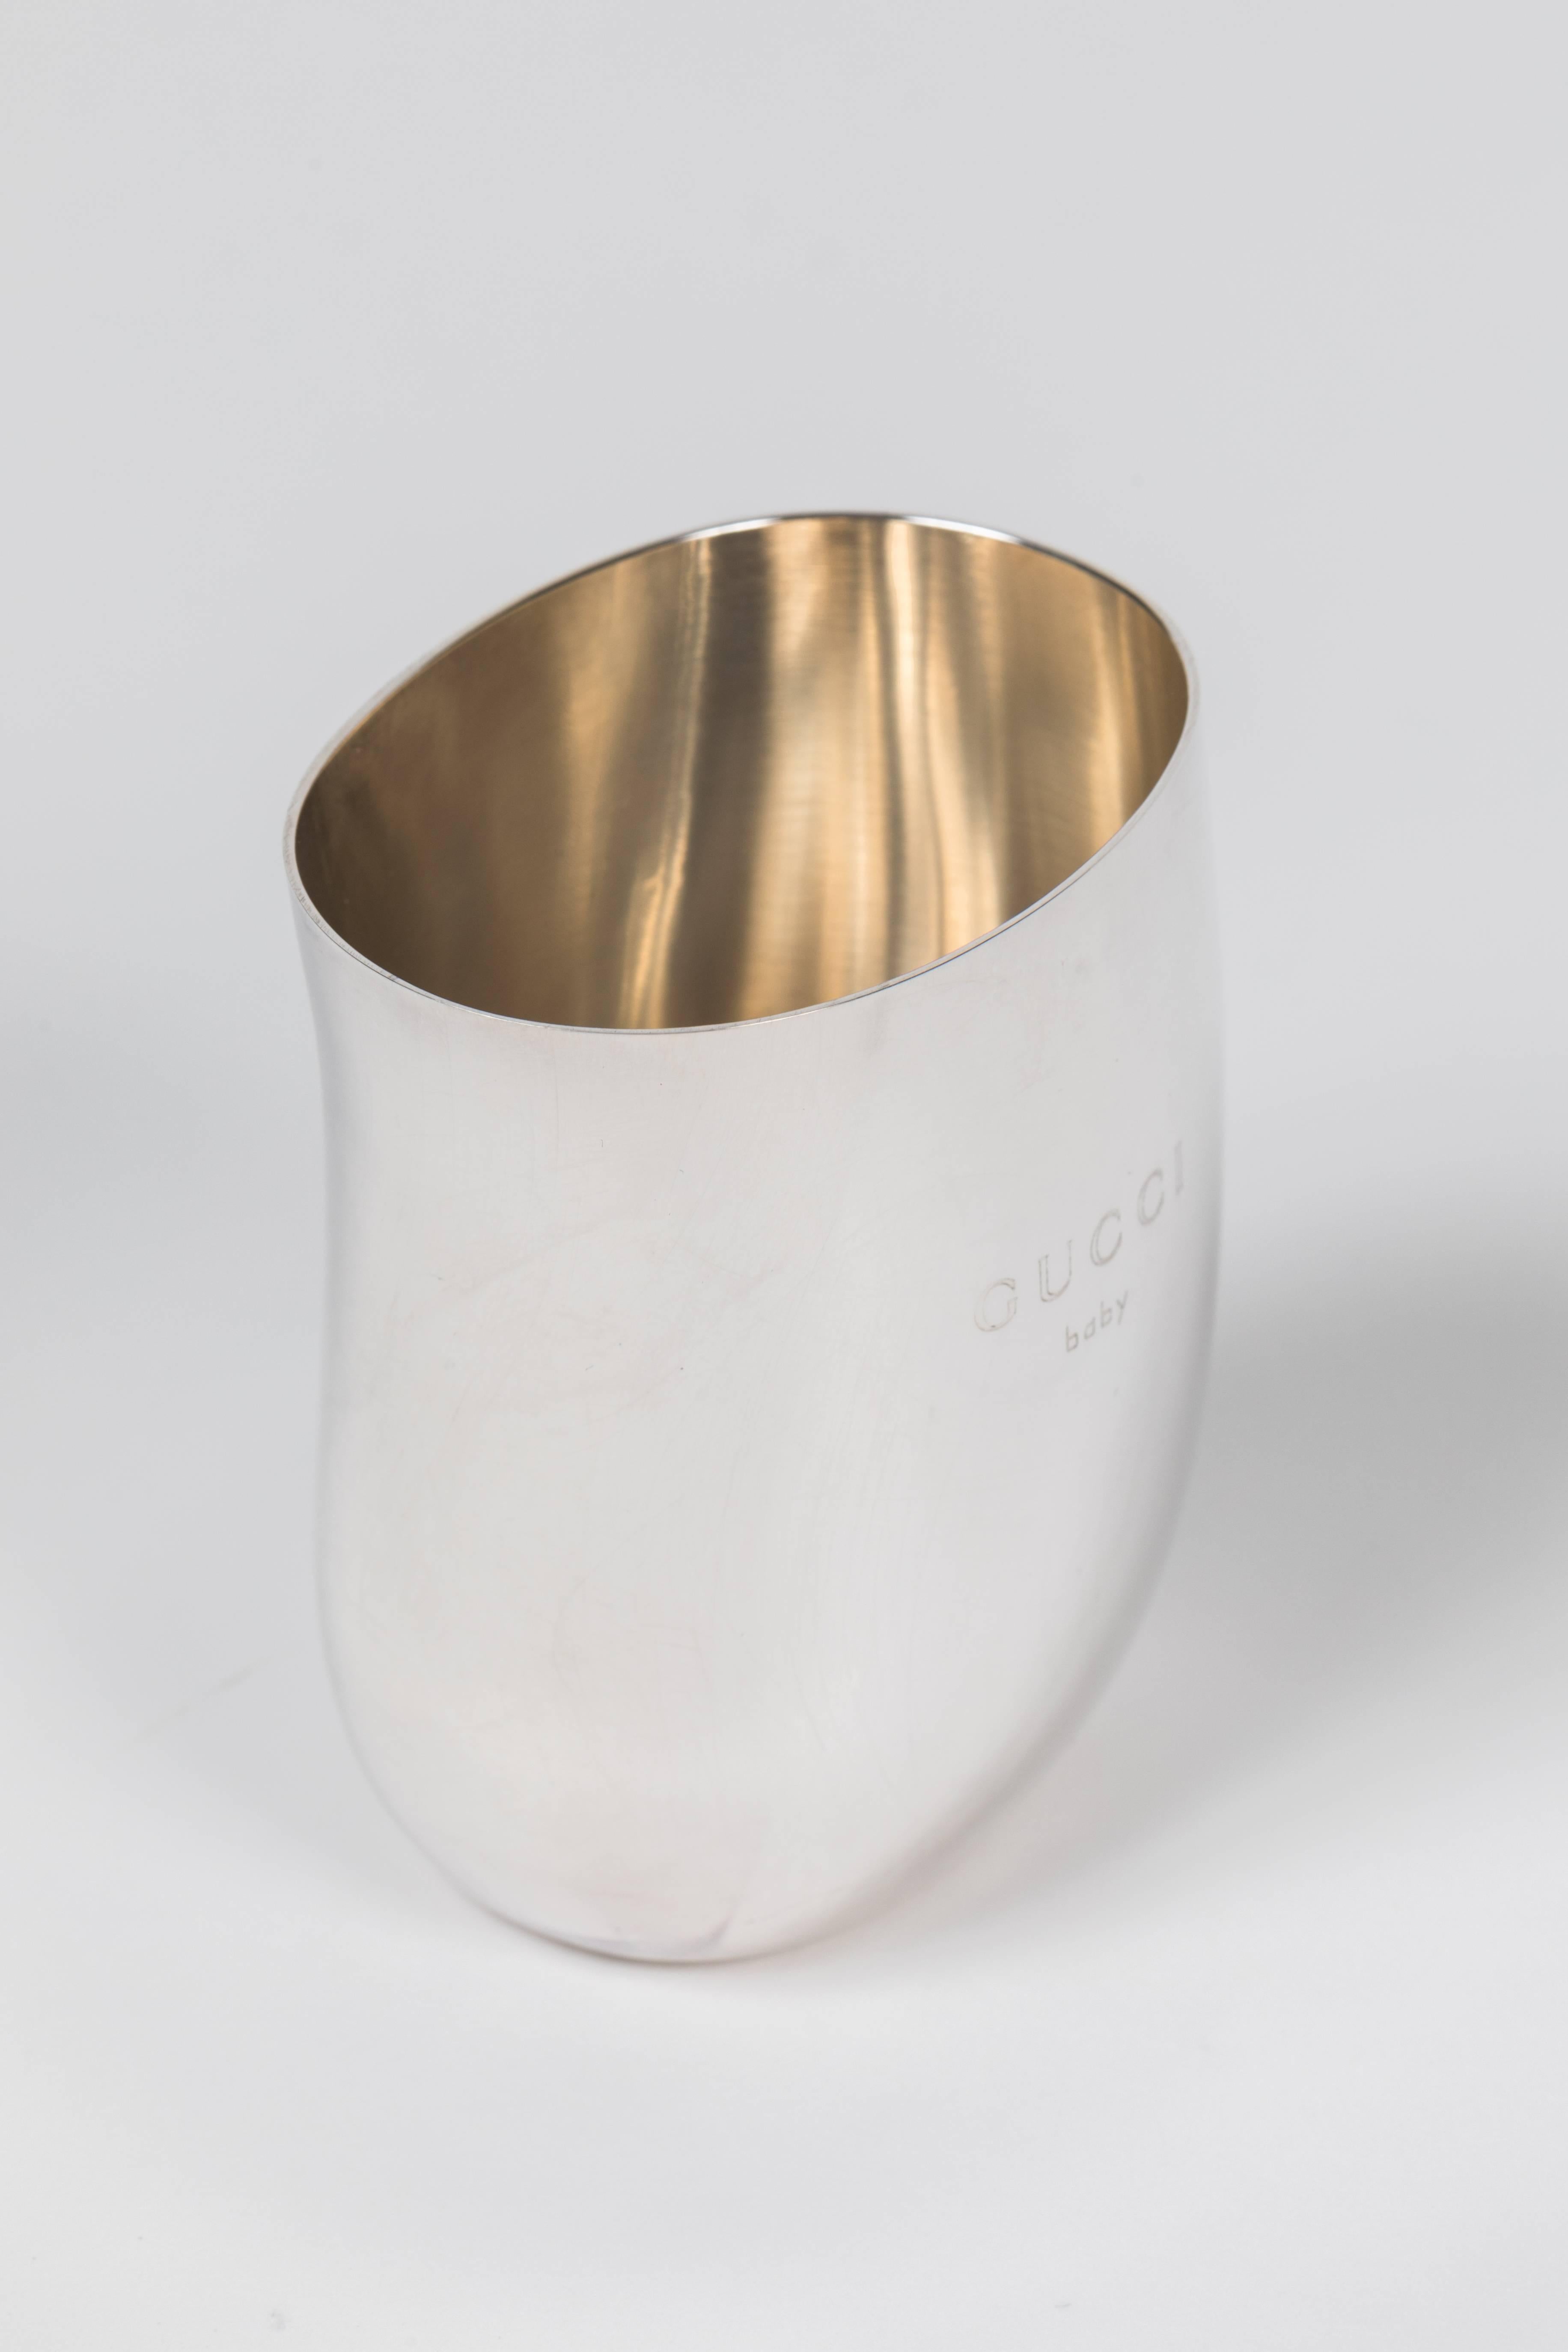 From the Tom Ford era at Gucci, this sterling silver cup is engraved 